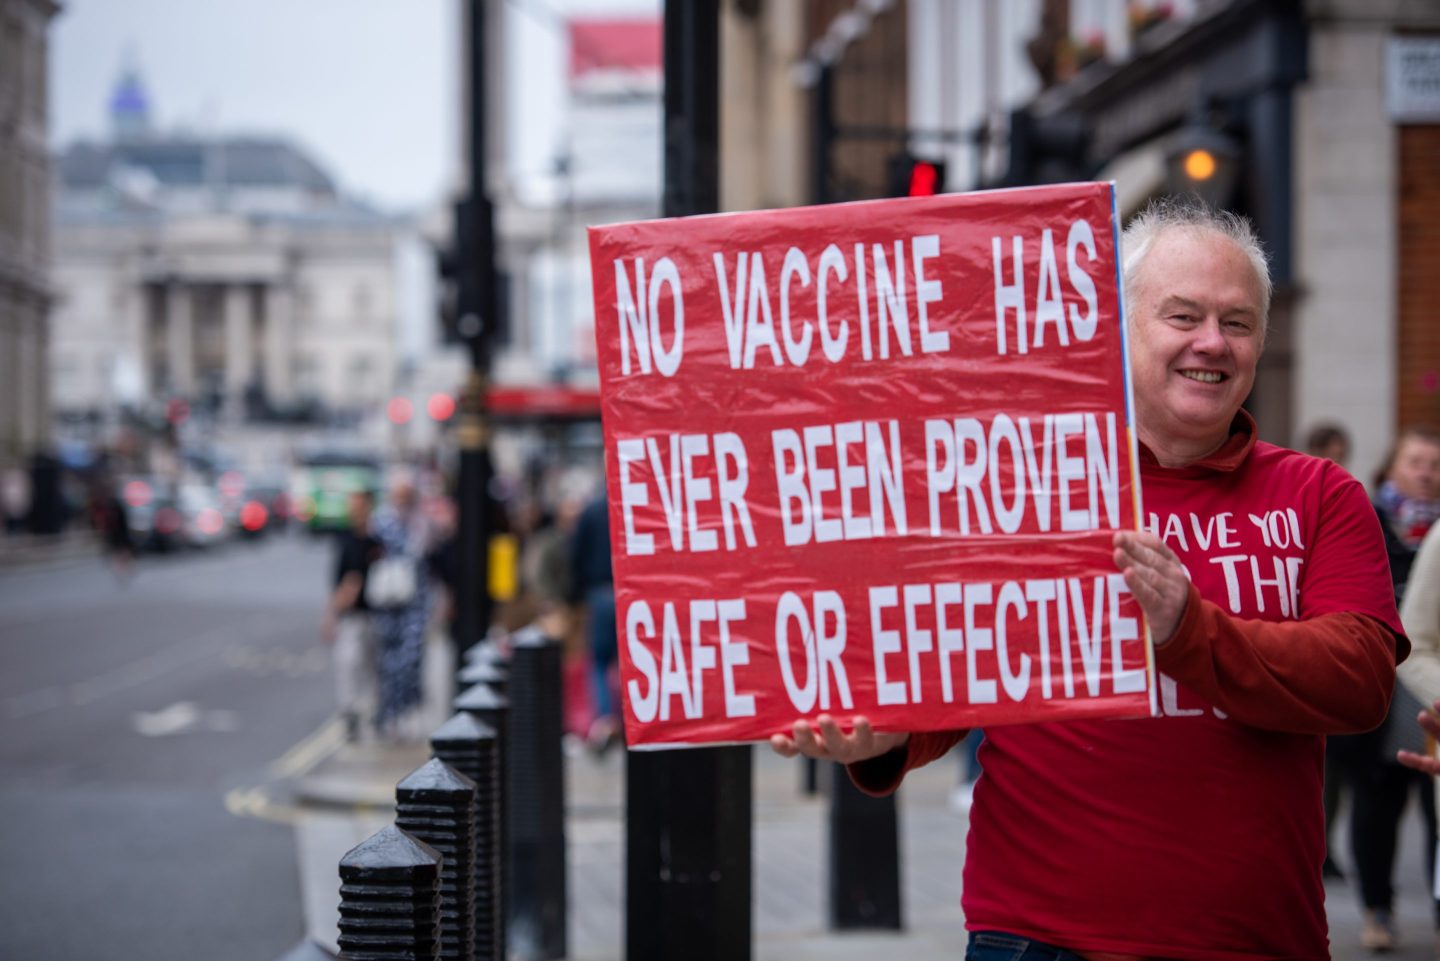 LONDON, UNITED KINGDOM &#8211; 2023/05/13: A protester holds a placard during the Truth Be Told Demo while marching to Parliament Square in London. In June 2023, the government plans to expand the age group of those eligible to get vaccinated with Covid-19 vaccines to 6-month-olds. Anti-covid vaccine demonstrators were protesting against this plan pointing to the possible risks posed by Covid vaccines. Some relatives of those who allegedly died from the Covid-19 vaccines also joined the protest to seek justice for their loved ones. Currently, the government only allows 5-year-olds and above to get the Covid-19 vaccine. (Photo by Loredana Sangiuliano/SOPA Images/LightRocket via Getty Images)